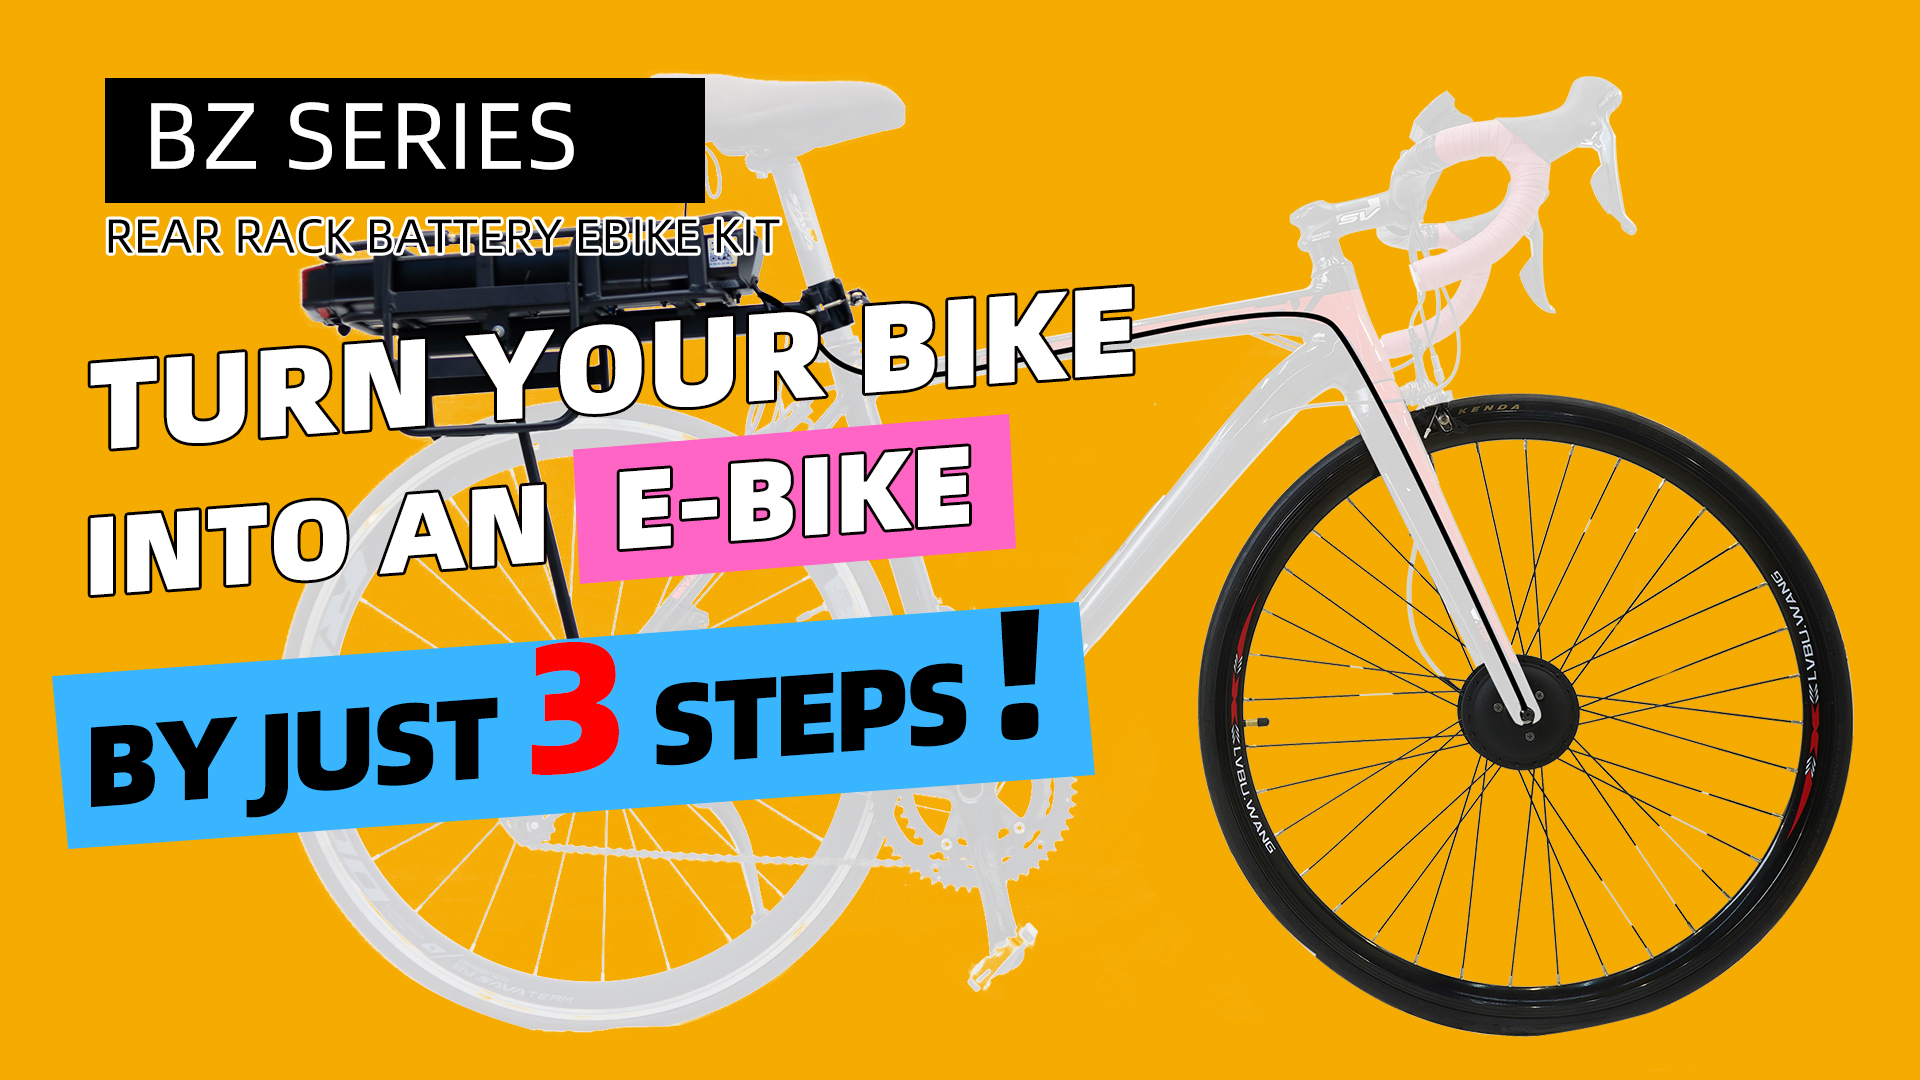 Rear Rack Ebike Kit ‖ BZ-V Installation video ‖ Turn Your Bike into an Ebike by Just 3 Steps!